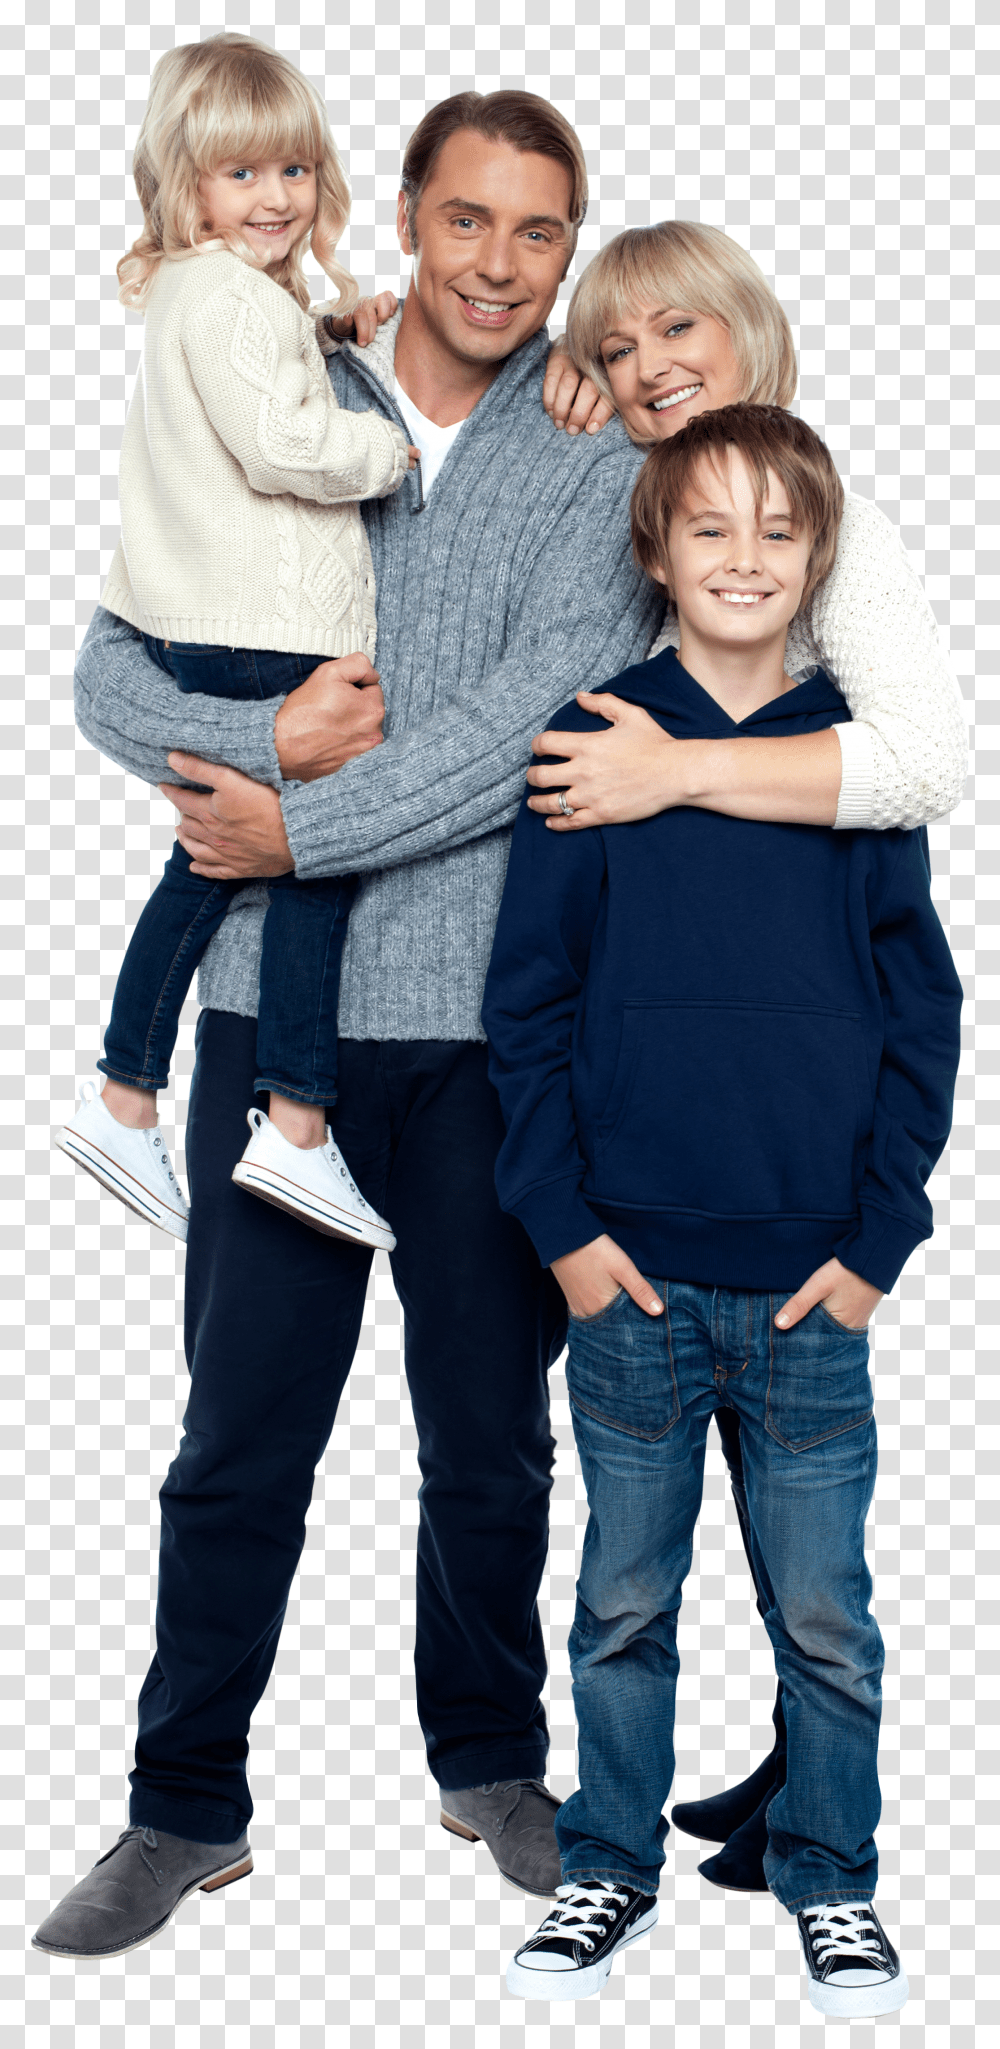 Images Background Family Posing Photo Transparent Png